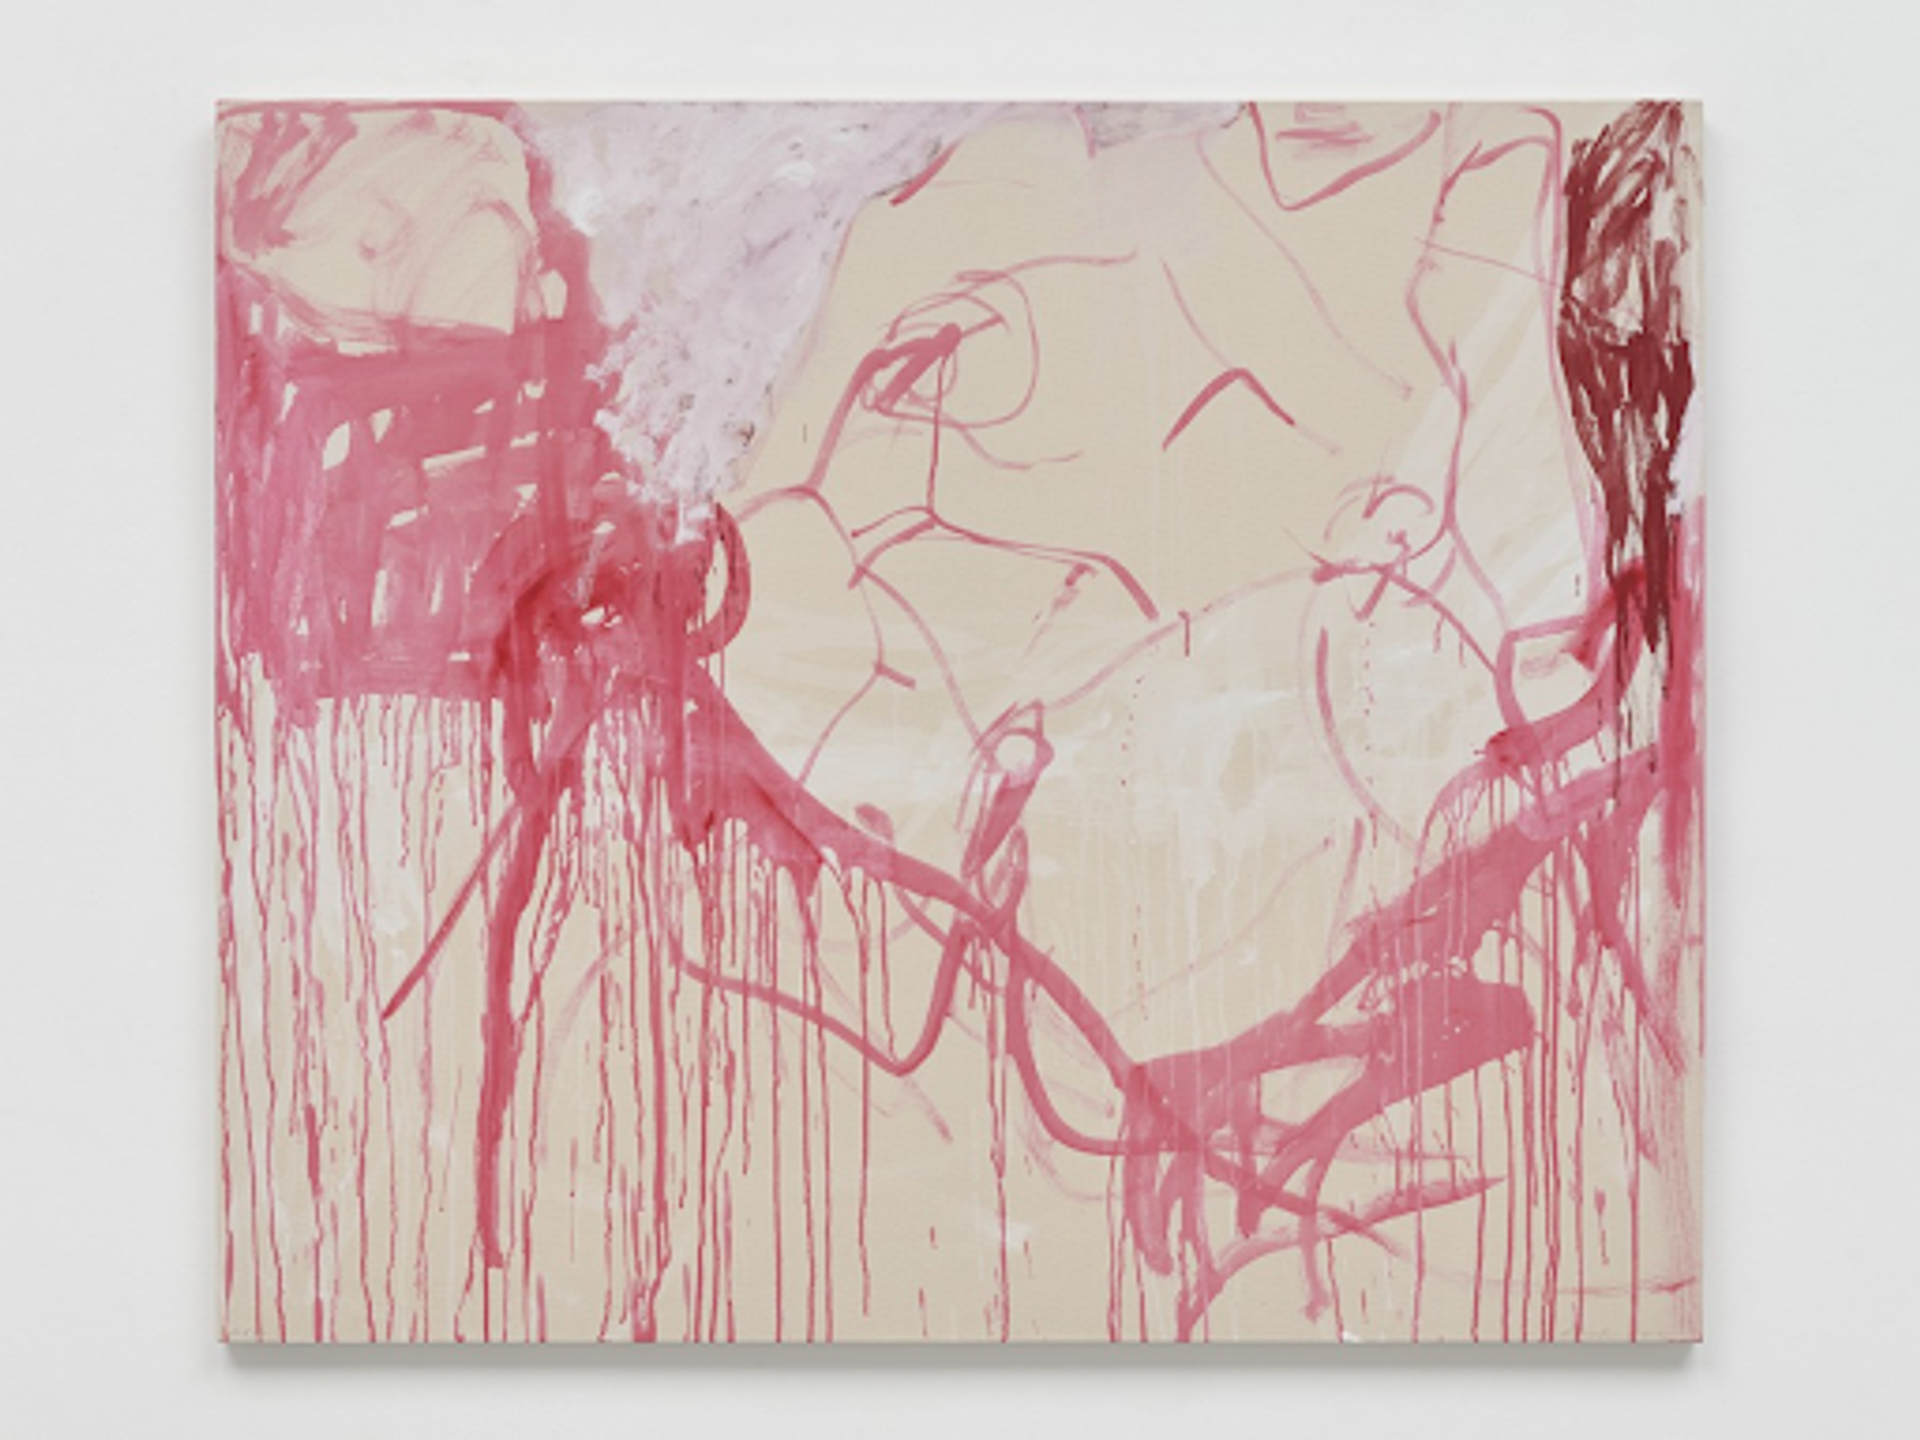 Tracey Emin’s WET. A painting of a nude female figure in shades of pink. Her legs are open and she is surrounded by the colour. 